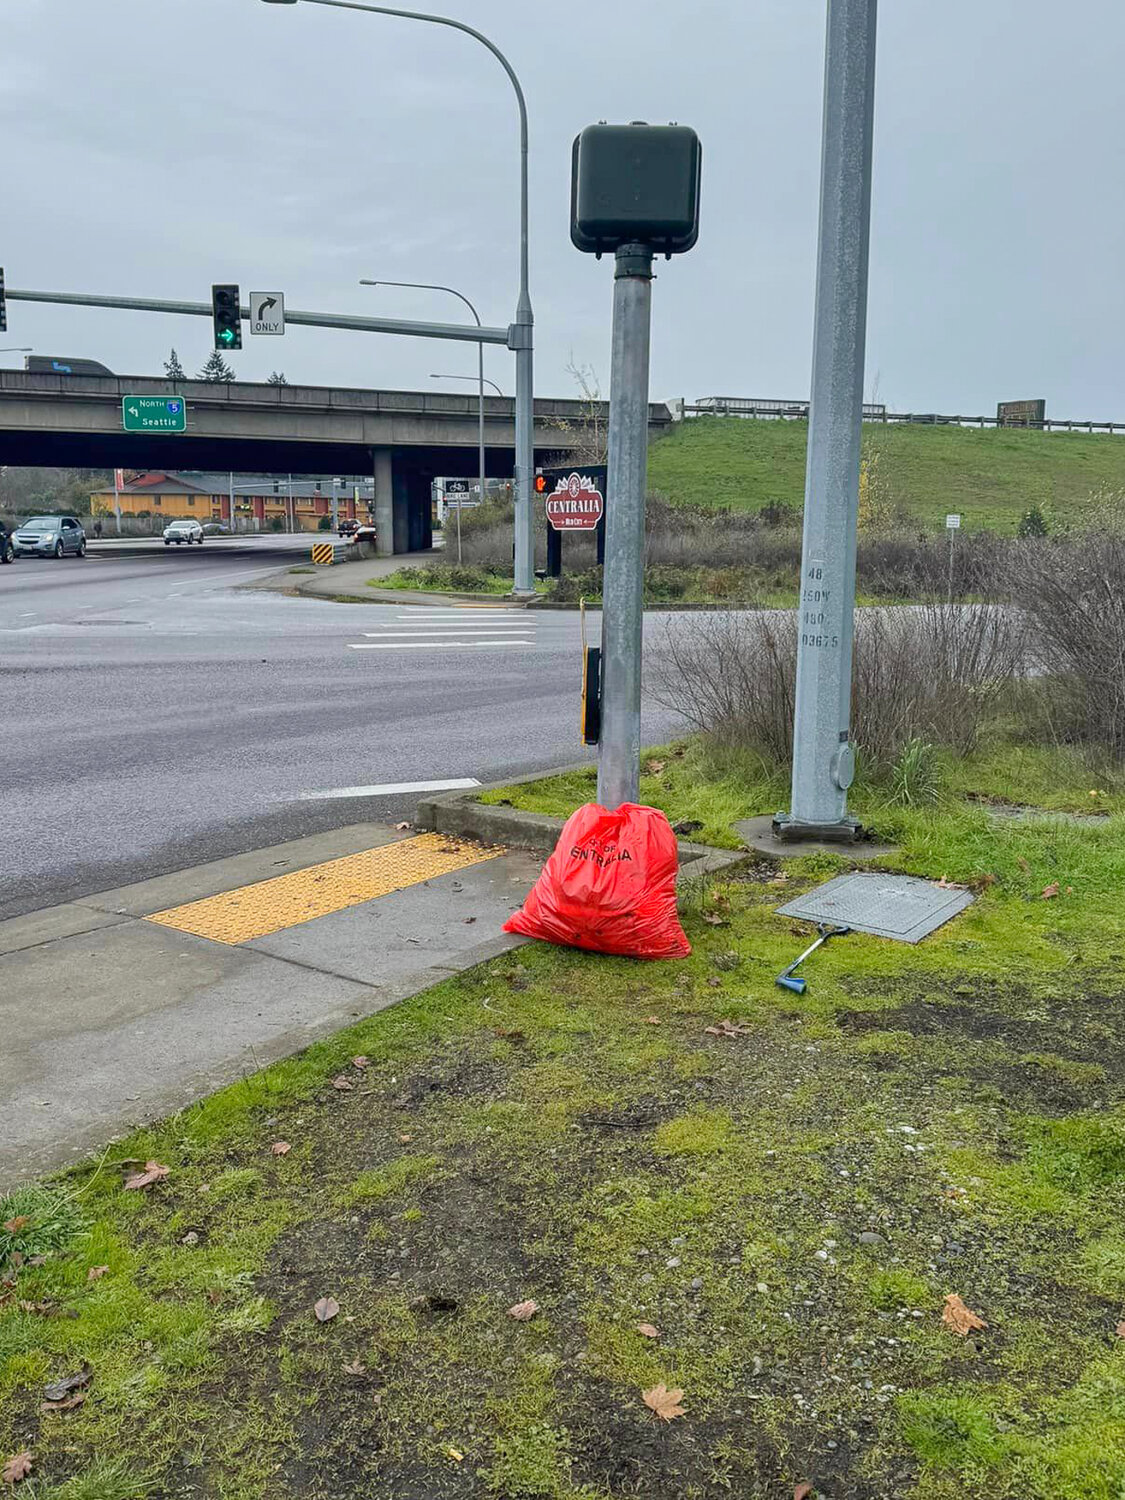 After filling up a City of Centralia trashbag from the Centralia Public Works Department, bags are to be left near the road so they can easily be collected by city staff as seen in this Nov. 30 picture provided by Centralia Clean Team volunteer Albert Blaser.